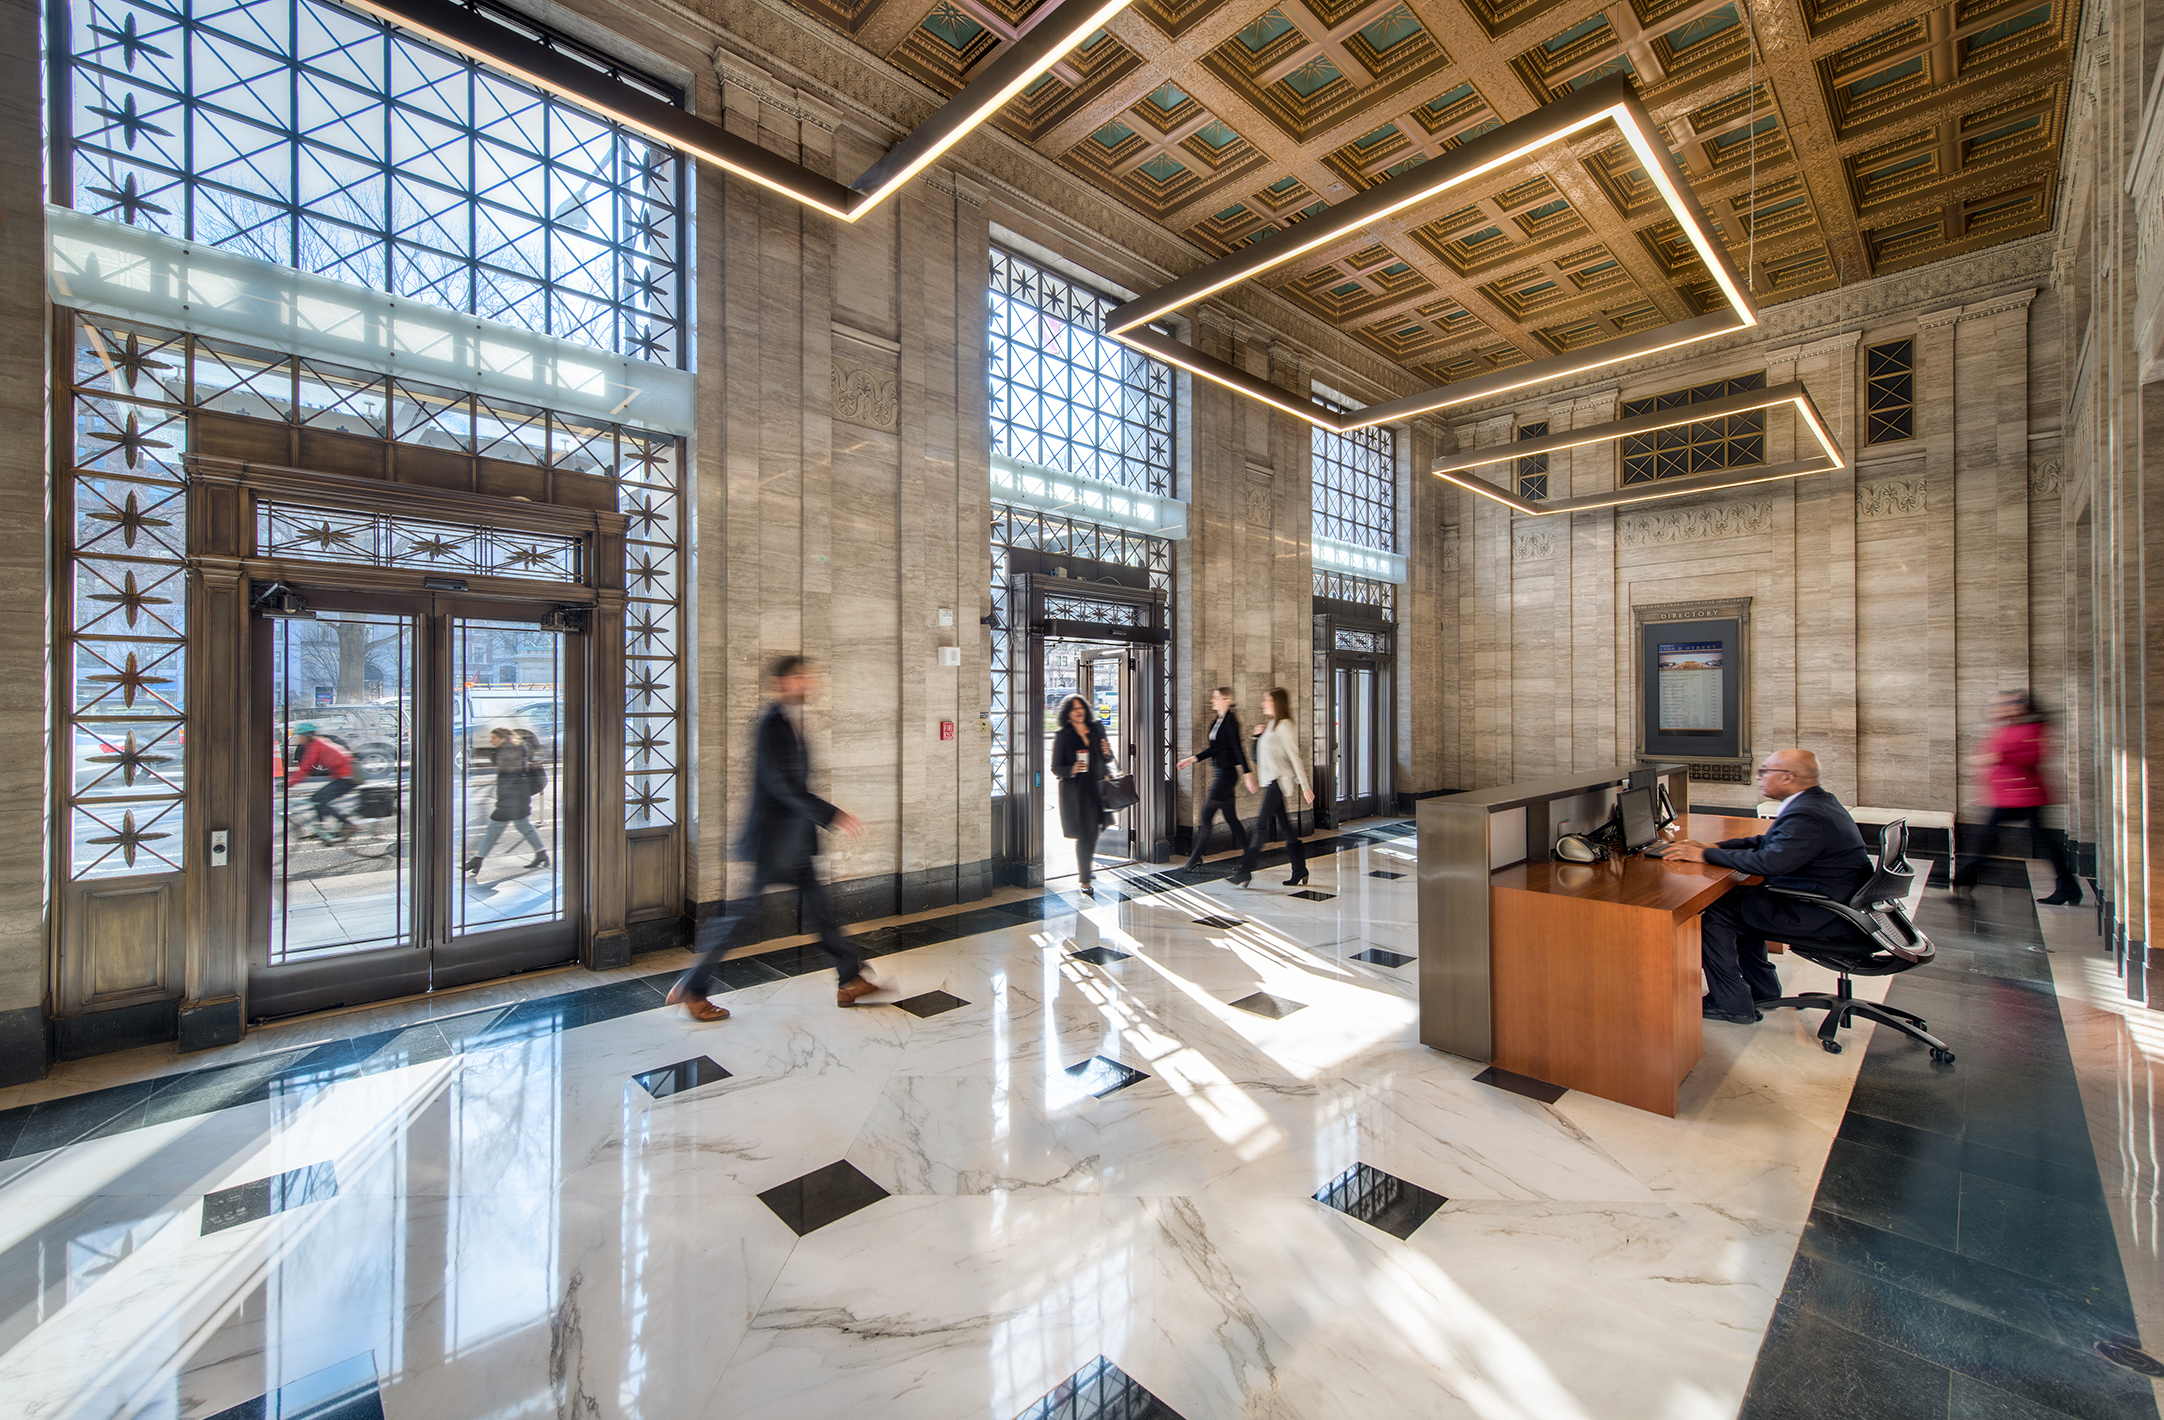 Alternative view of the 1500 K Street DC office building lobby featuring historic entrance and ceiling